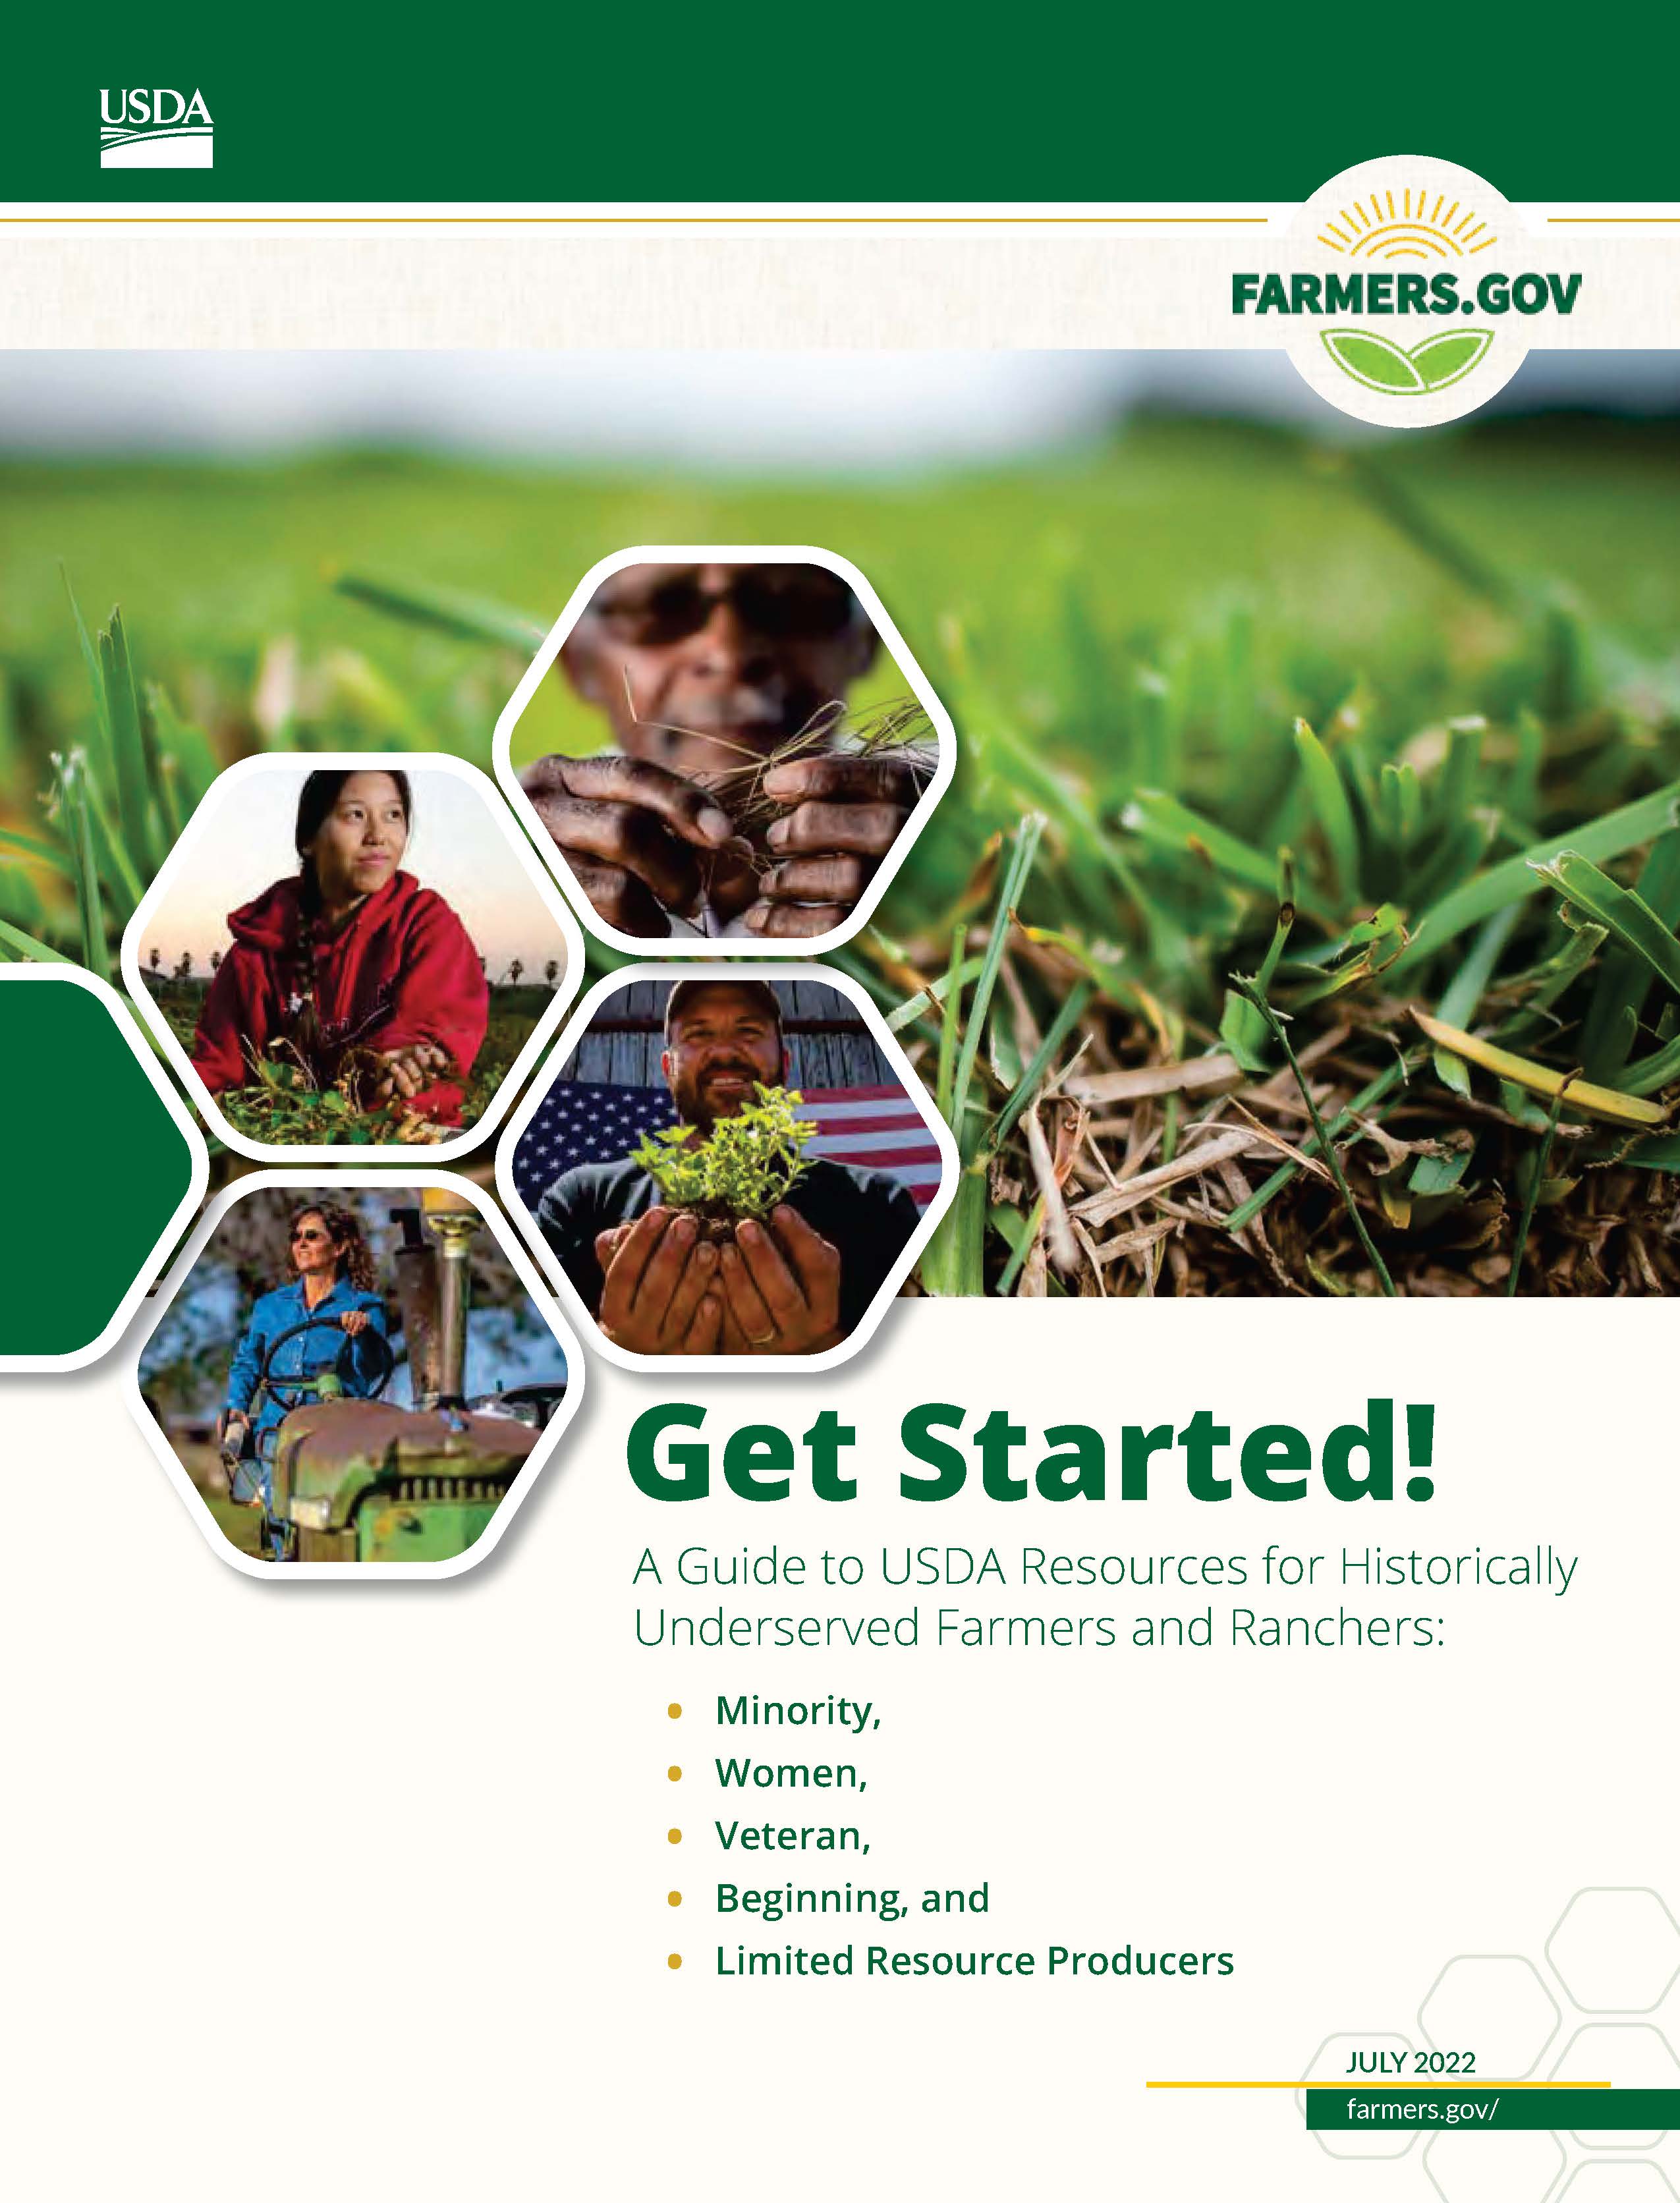 A Guide to USDA Resources for Historically Underserved Farmers and Ranchers